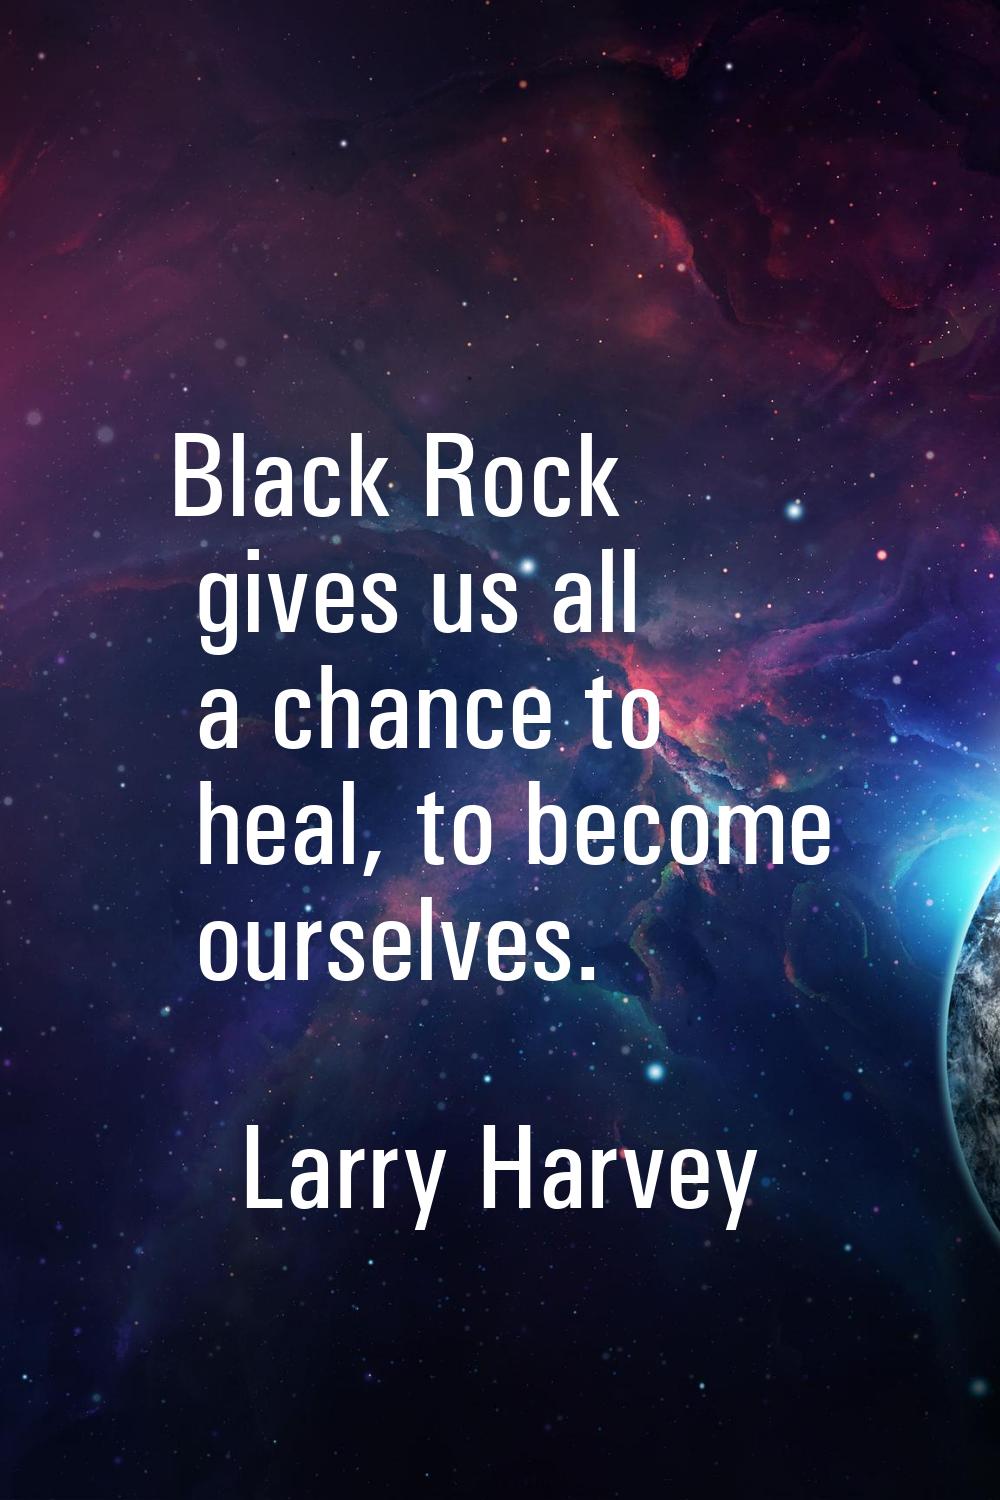 Black Rock gives us all a chance to heal, to become ourselves.